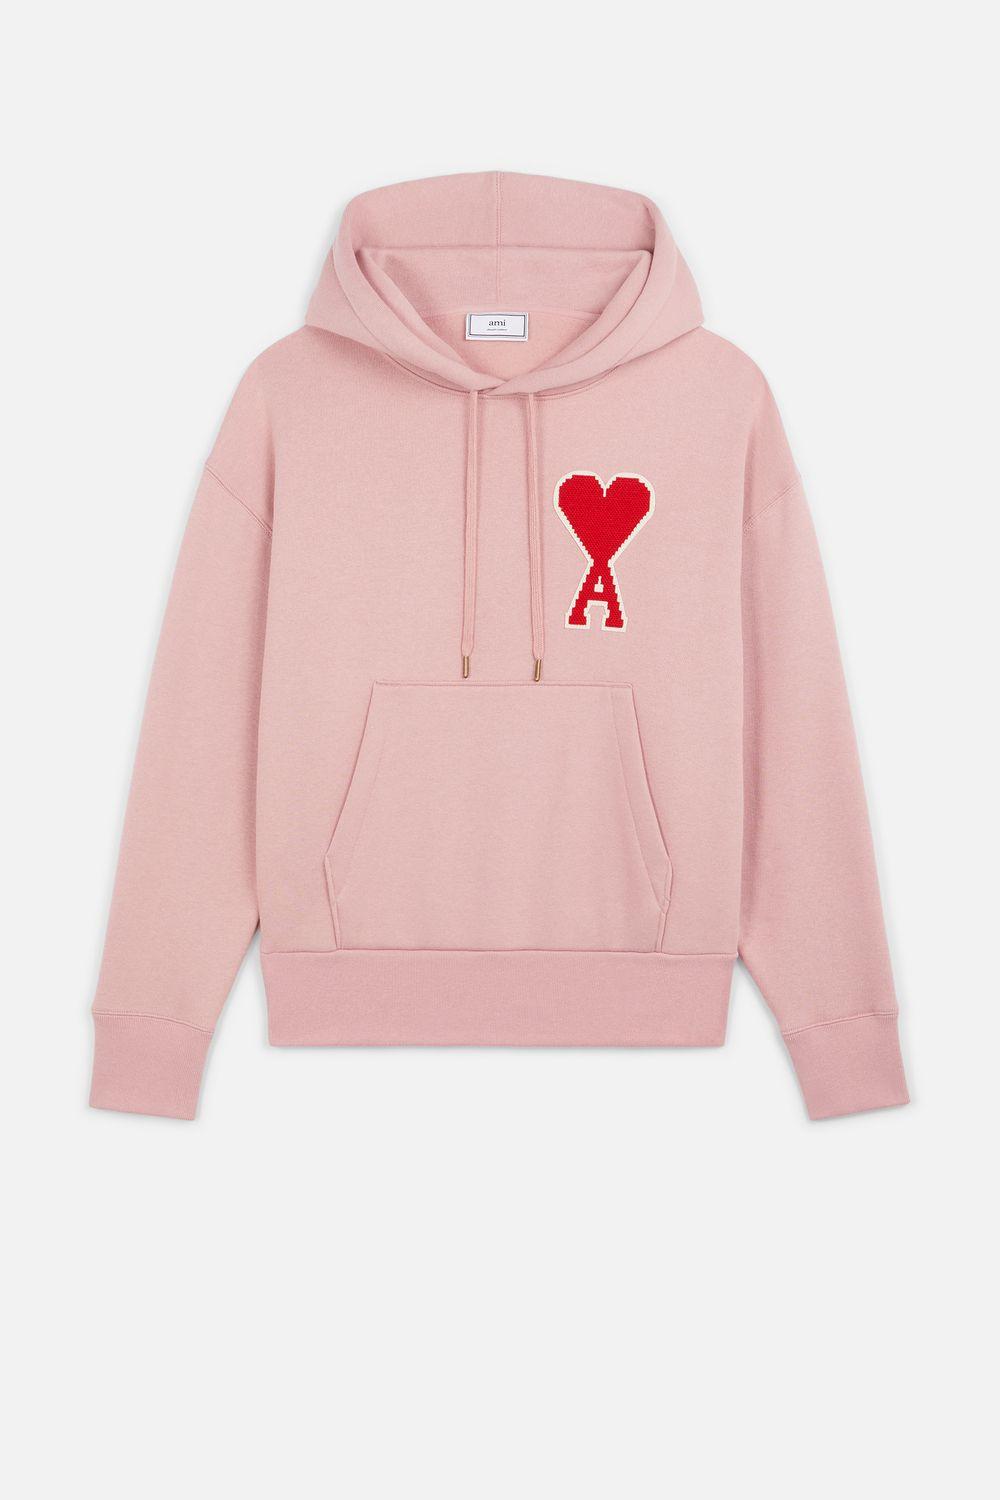 AMI Cotton Hoodie With Big Ami Coeur Patch in Pink for Men - Lyst